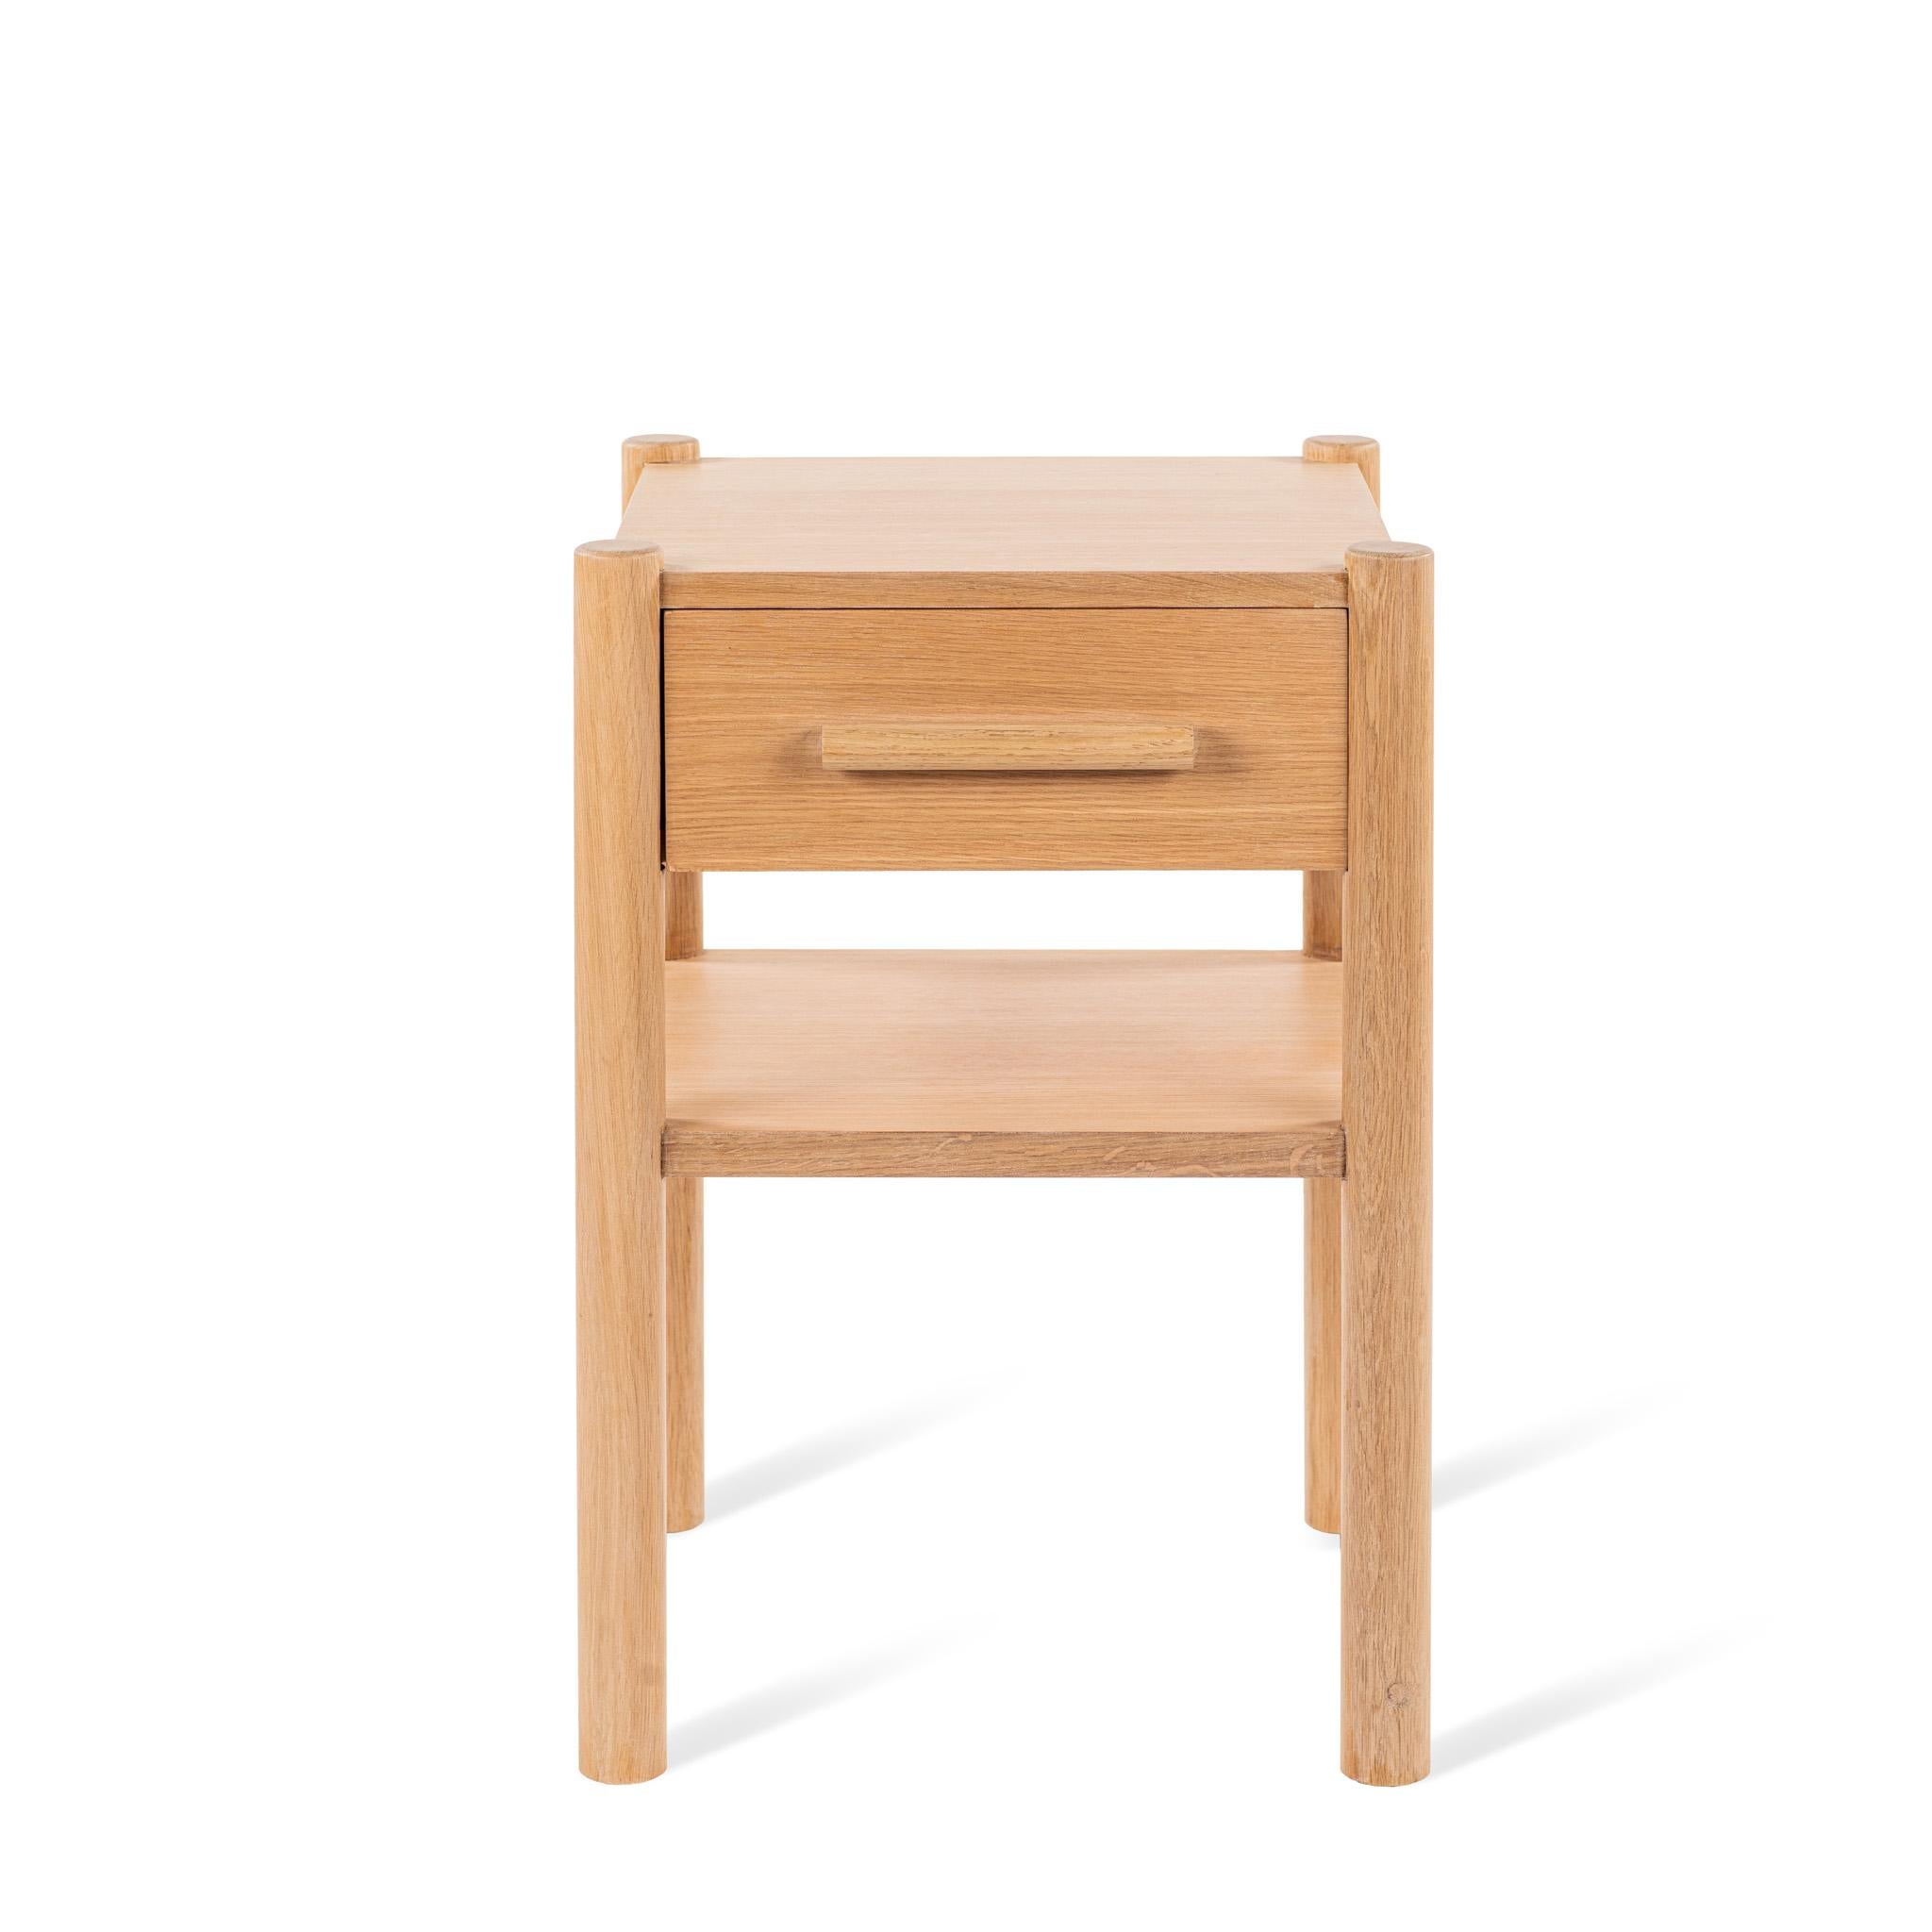 Designed by Josh Greene.
Nightstand with dowel shaped legs and drawer handle.

Also available in a large 30 x 18 size. 